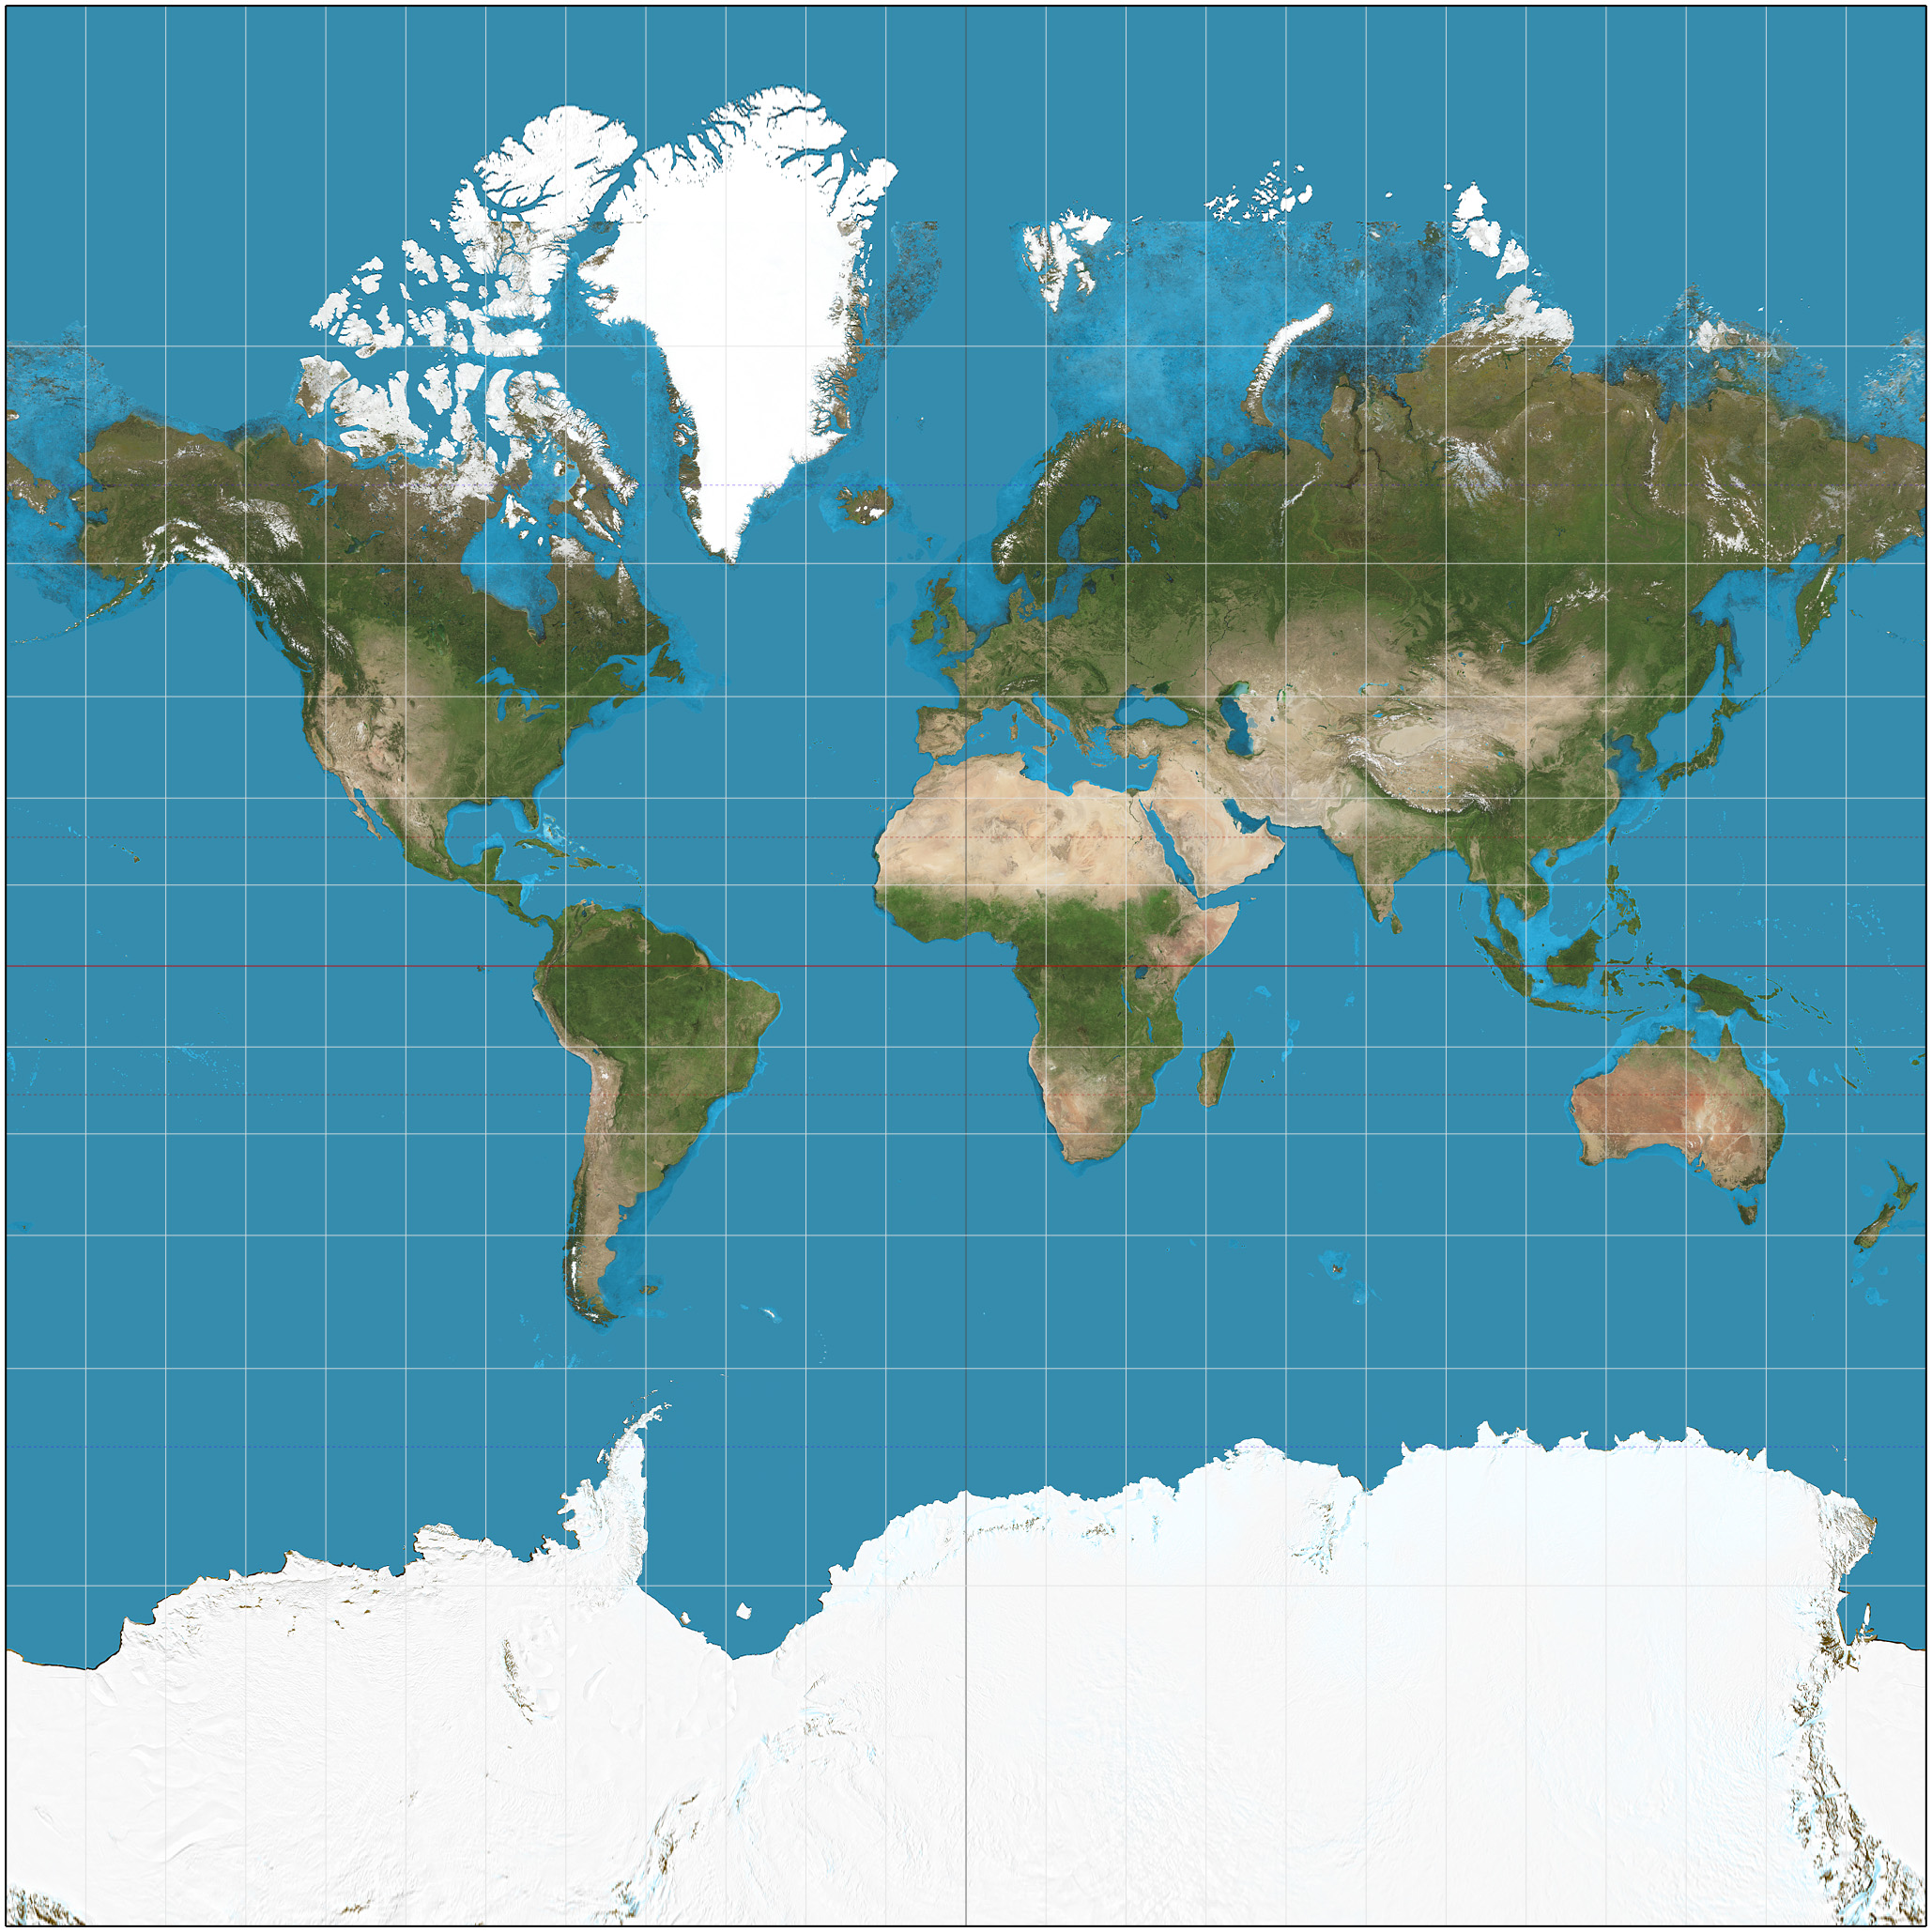 Image of Mercator map projection of the World